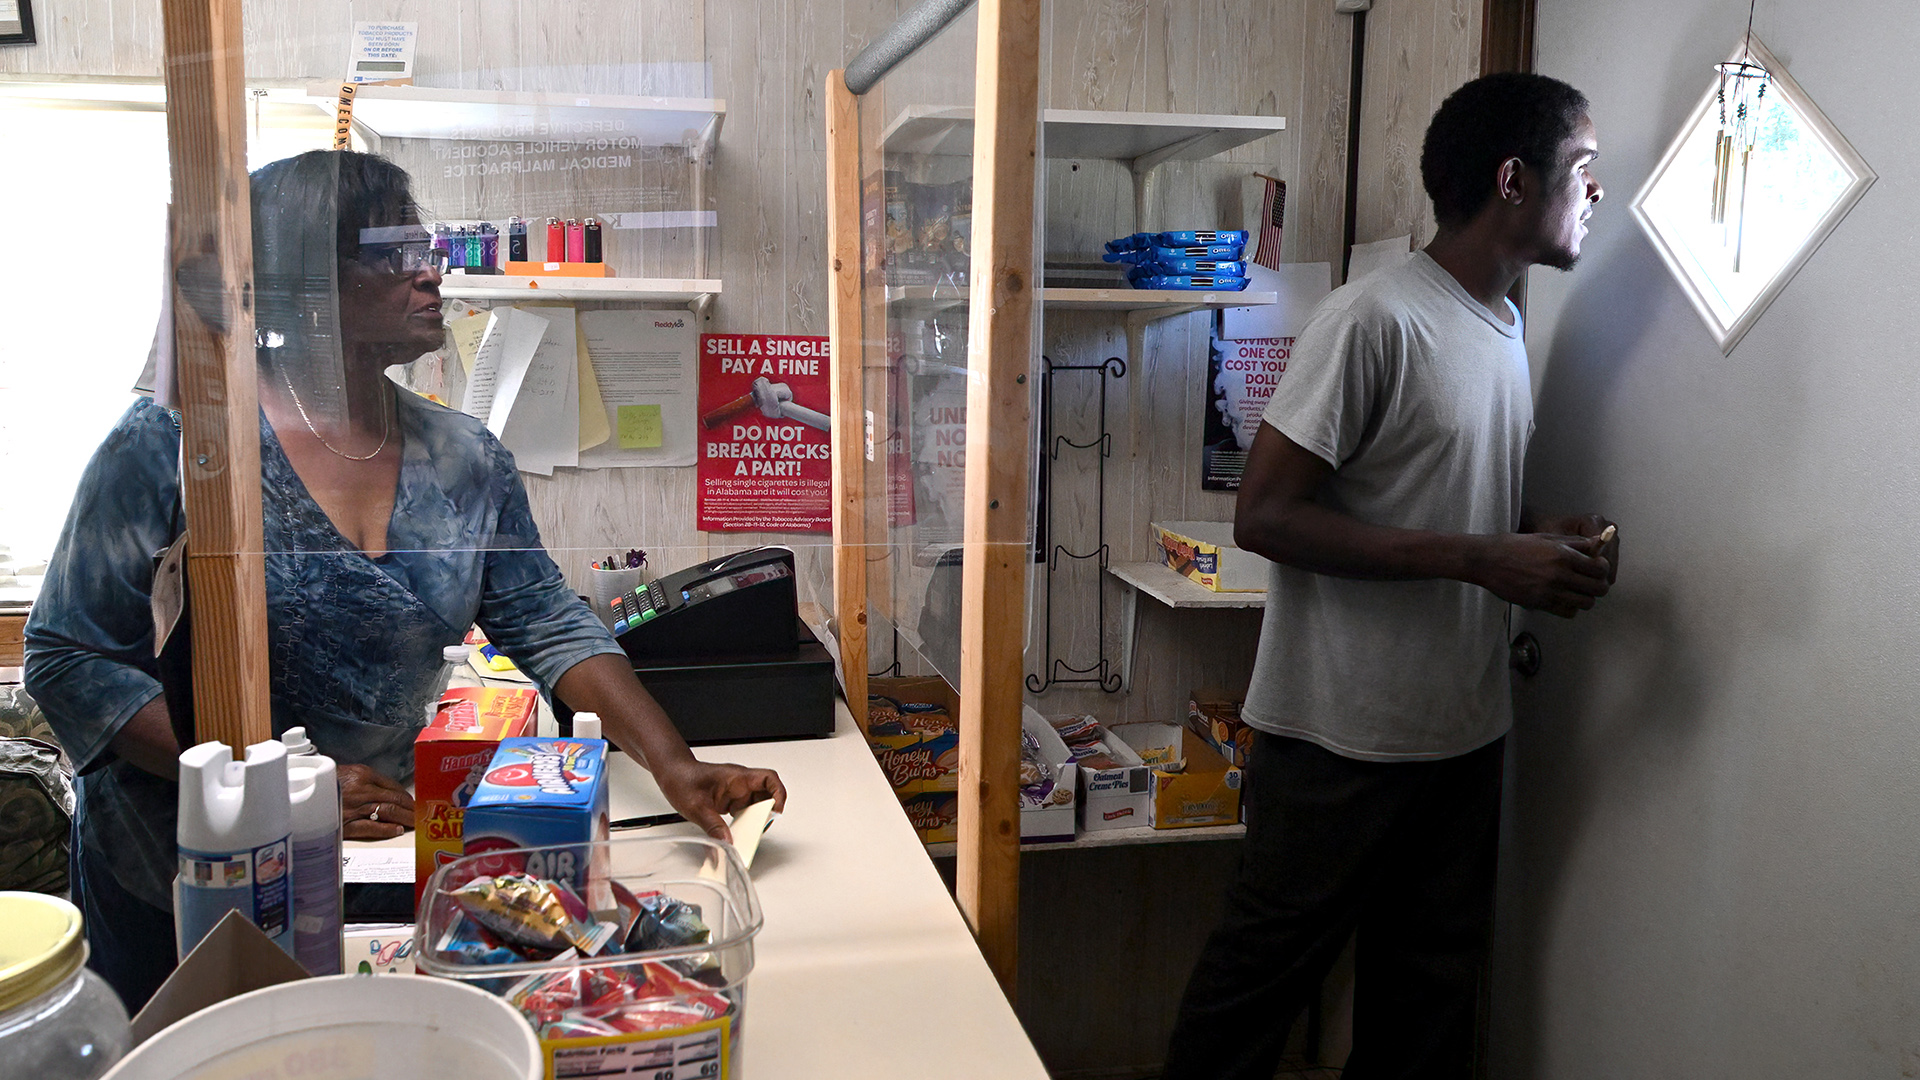 Dorothy Oliver stands behind a counter with a cash register and multiple items for sale, with a wood-and-transparent plastic sanitary barrier mounted on two sides, while Cedric Magee looks out a square window at a 45-degree angle in the top of a door.